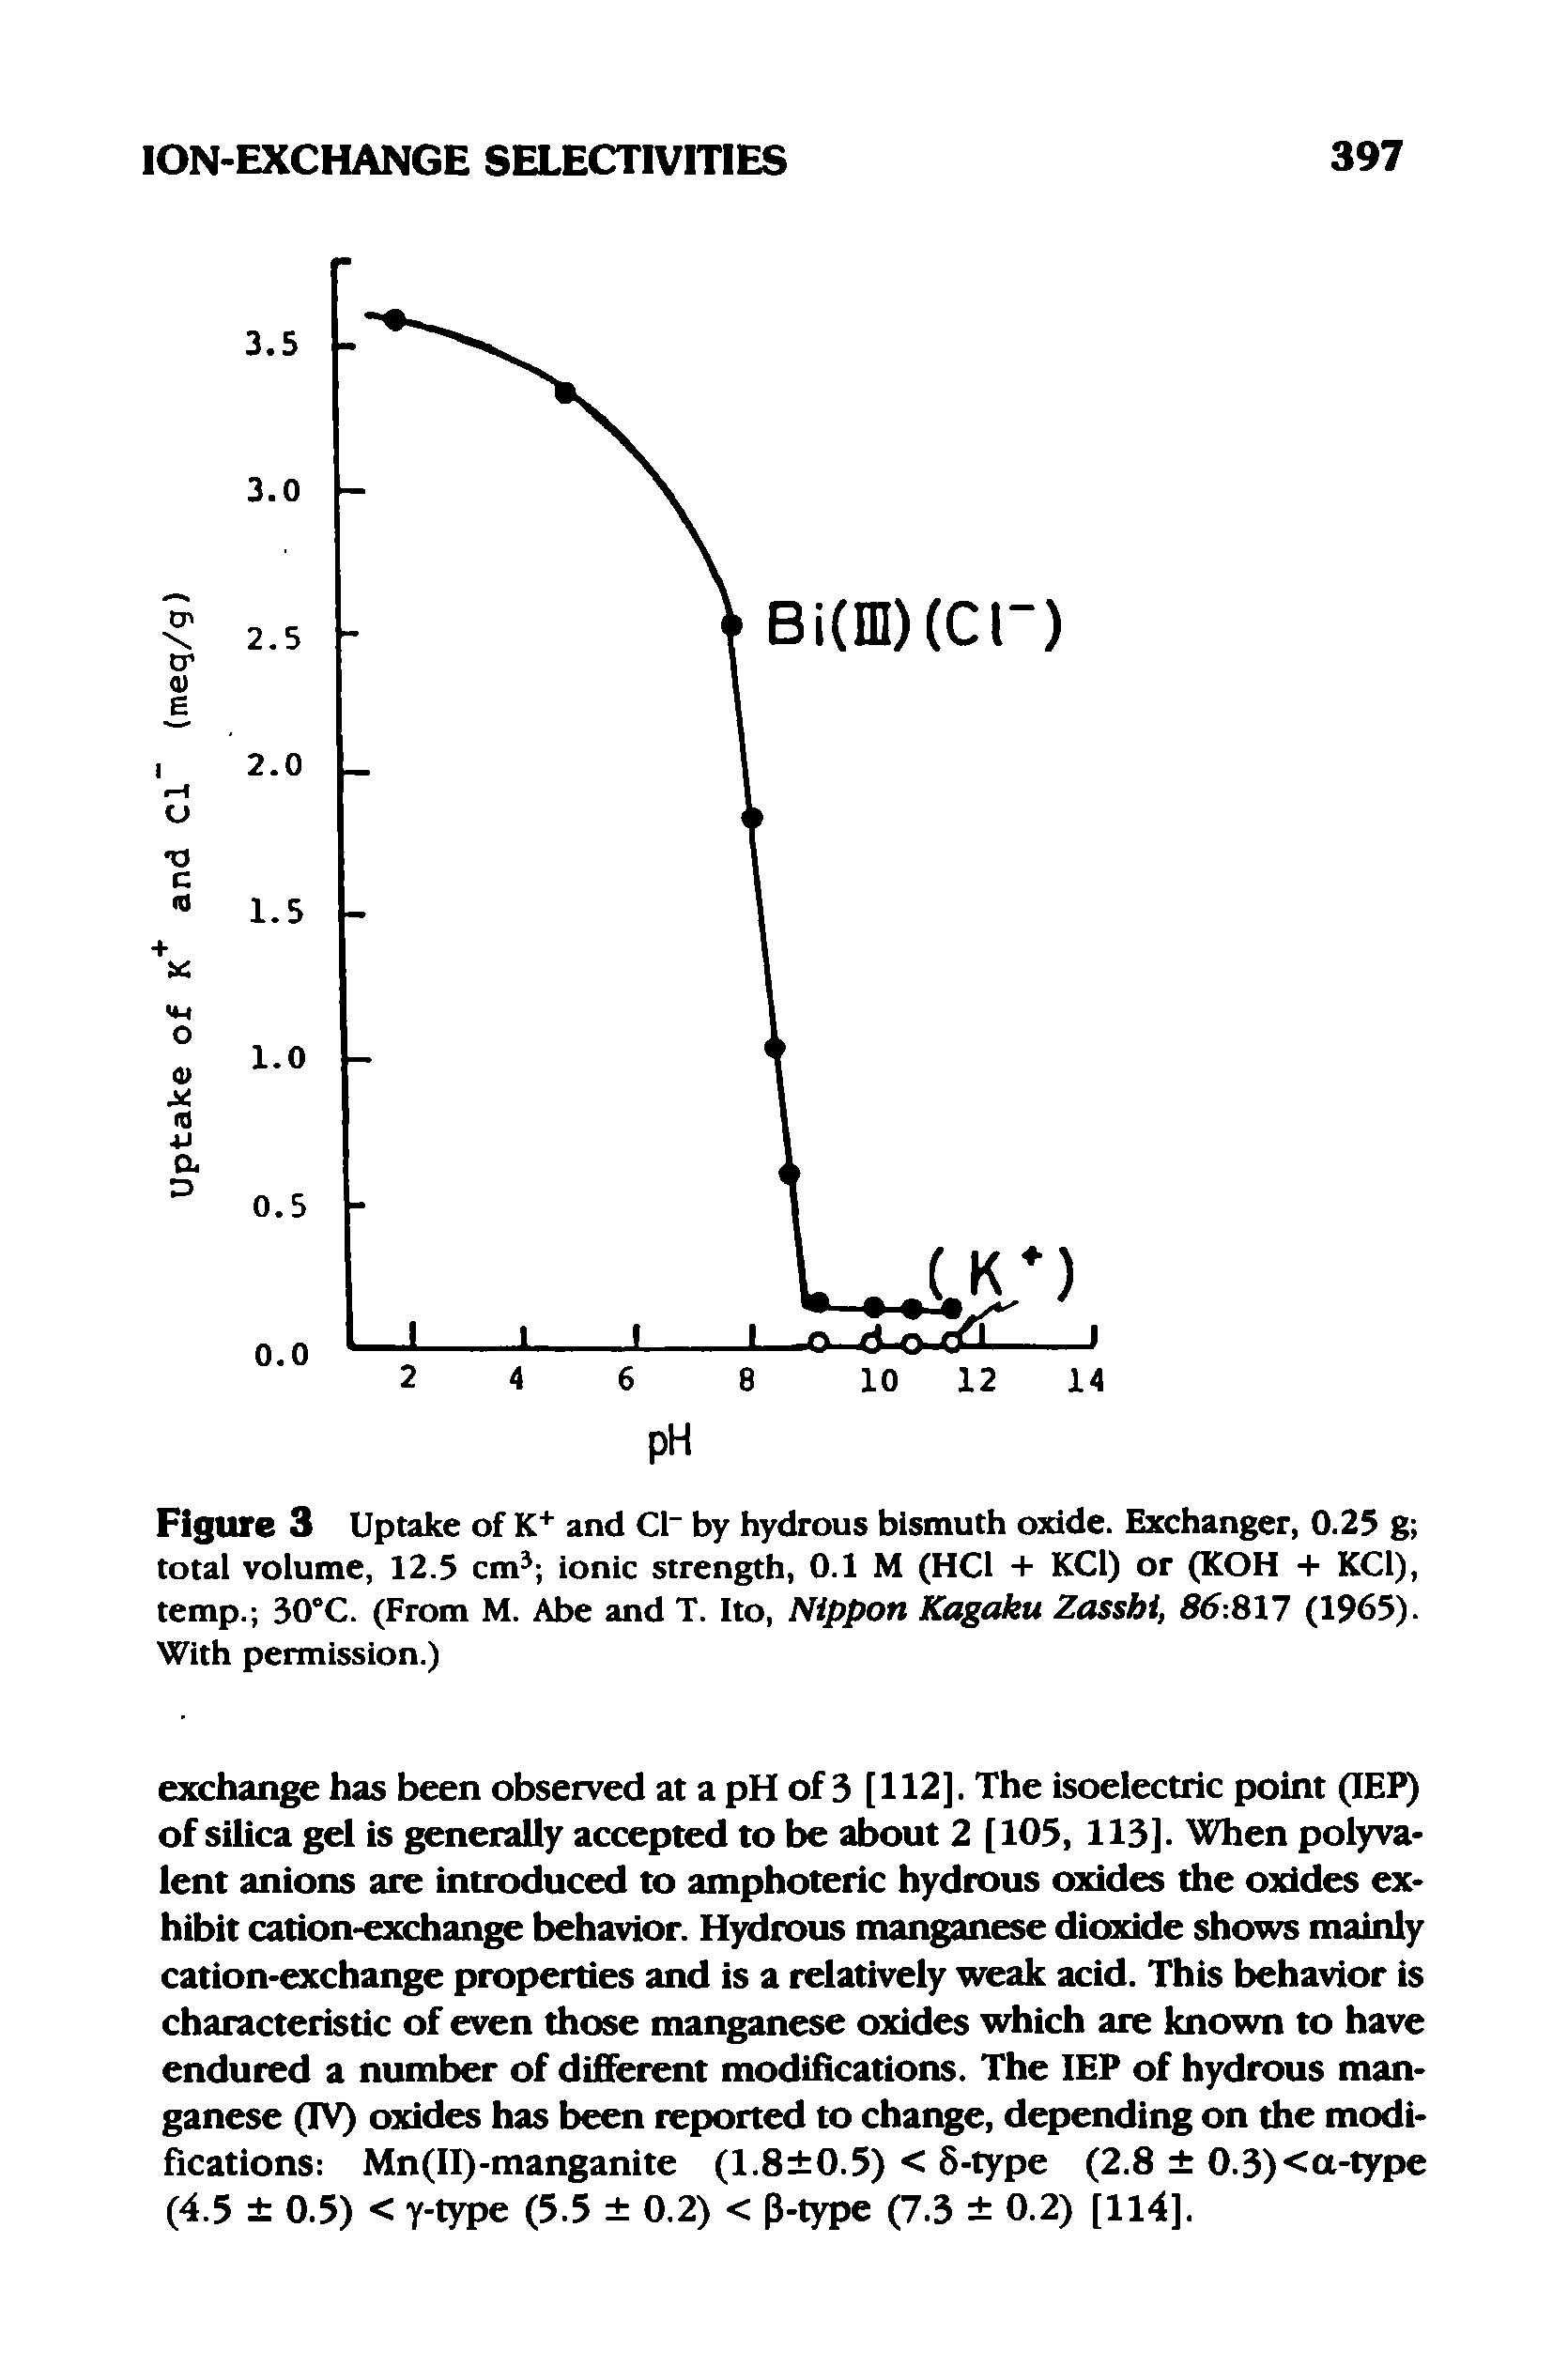 Figure 3 Uptake of K+ and Cl by hydrous bismuth oxide. Exchanger, 0.25 g total volume, 12.5 cm ionic strength, 0.1 M (HCl + KCl) or (KOH + KCl), temp. 30°C. (From M. Abe and T. Ito, Nippon Kagaku Zasshi, 85 817 (1965). With permission.)...